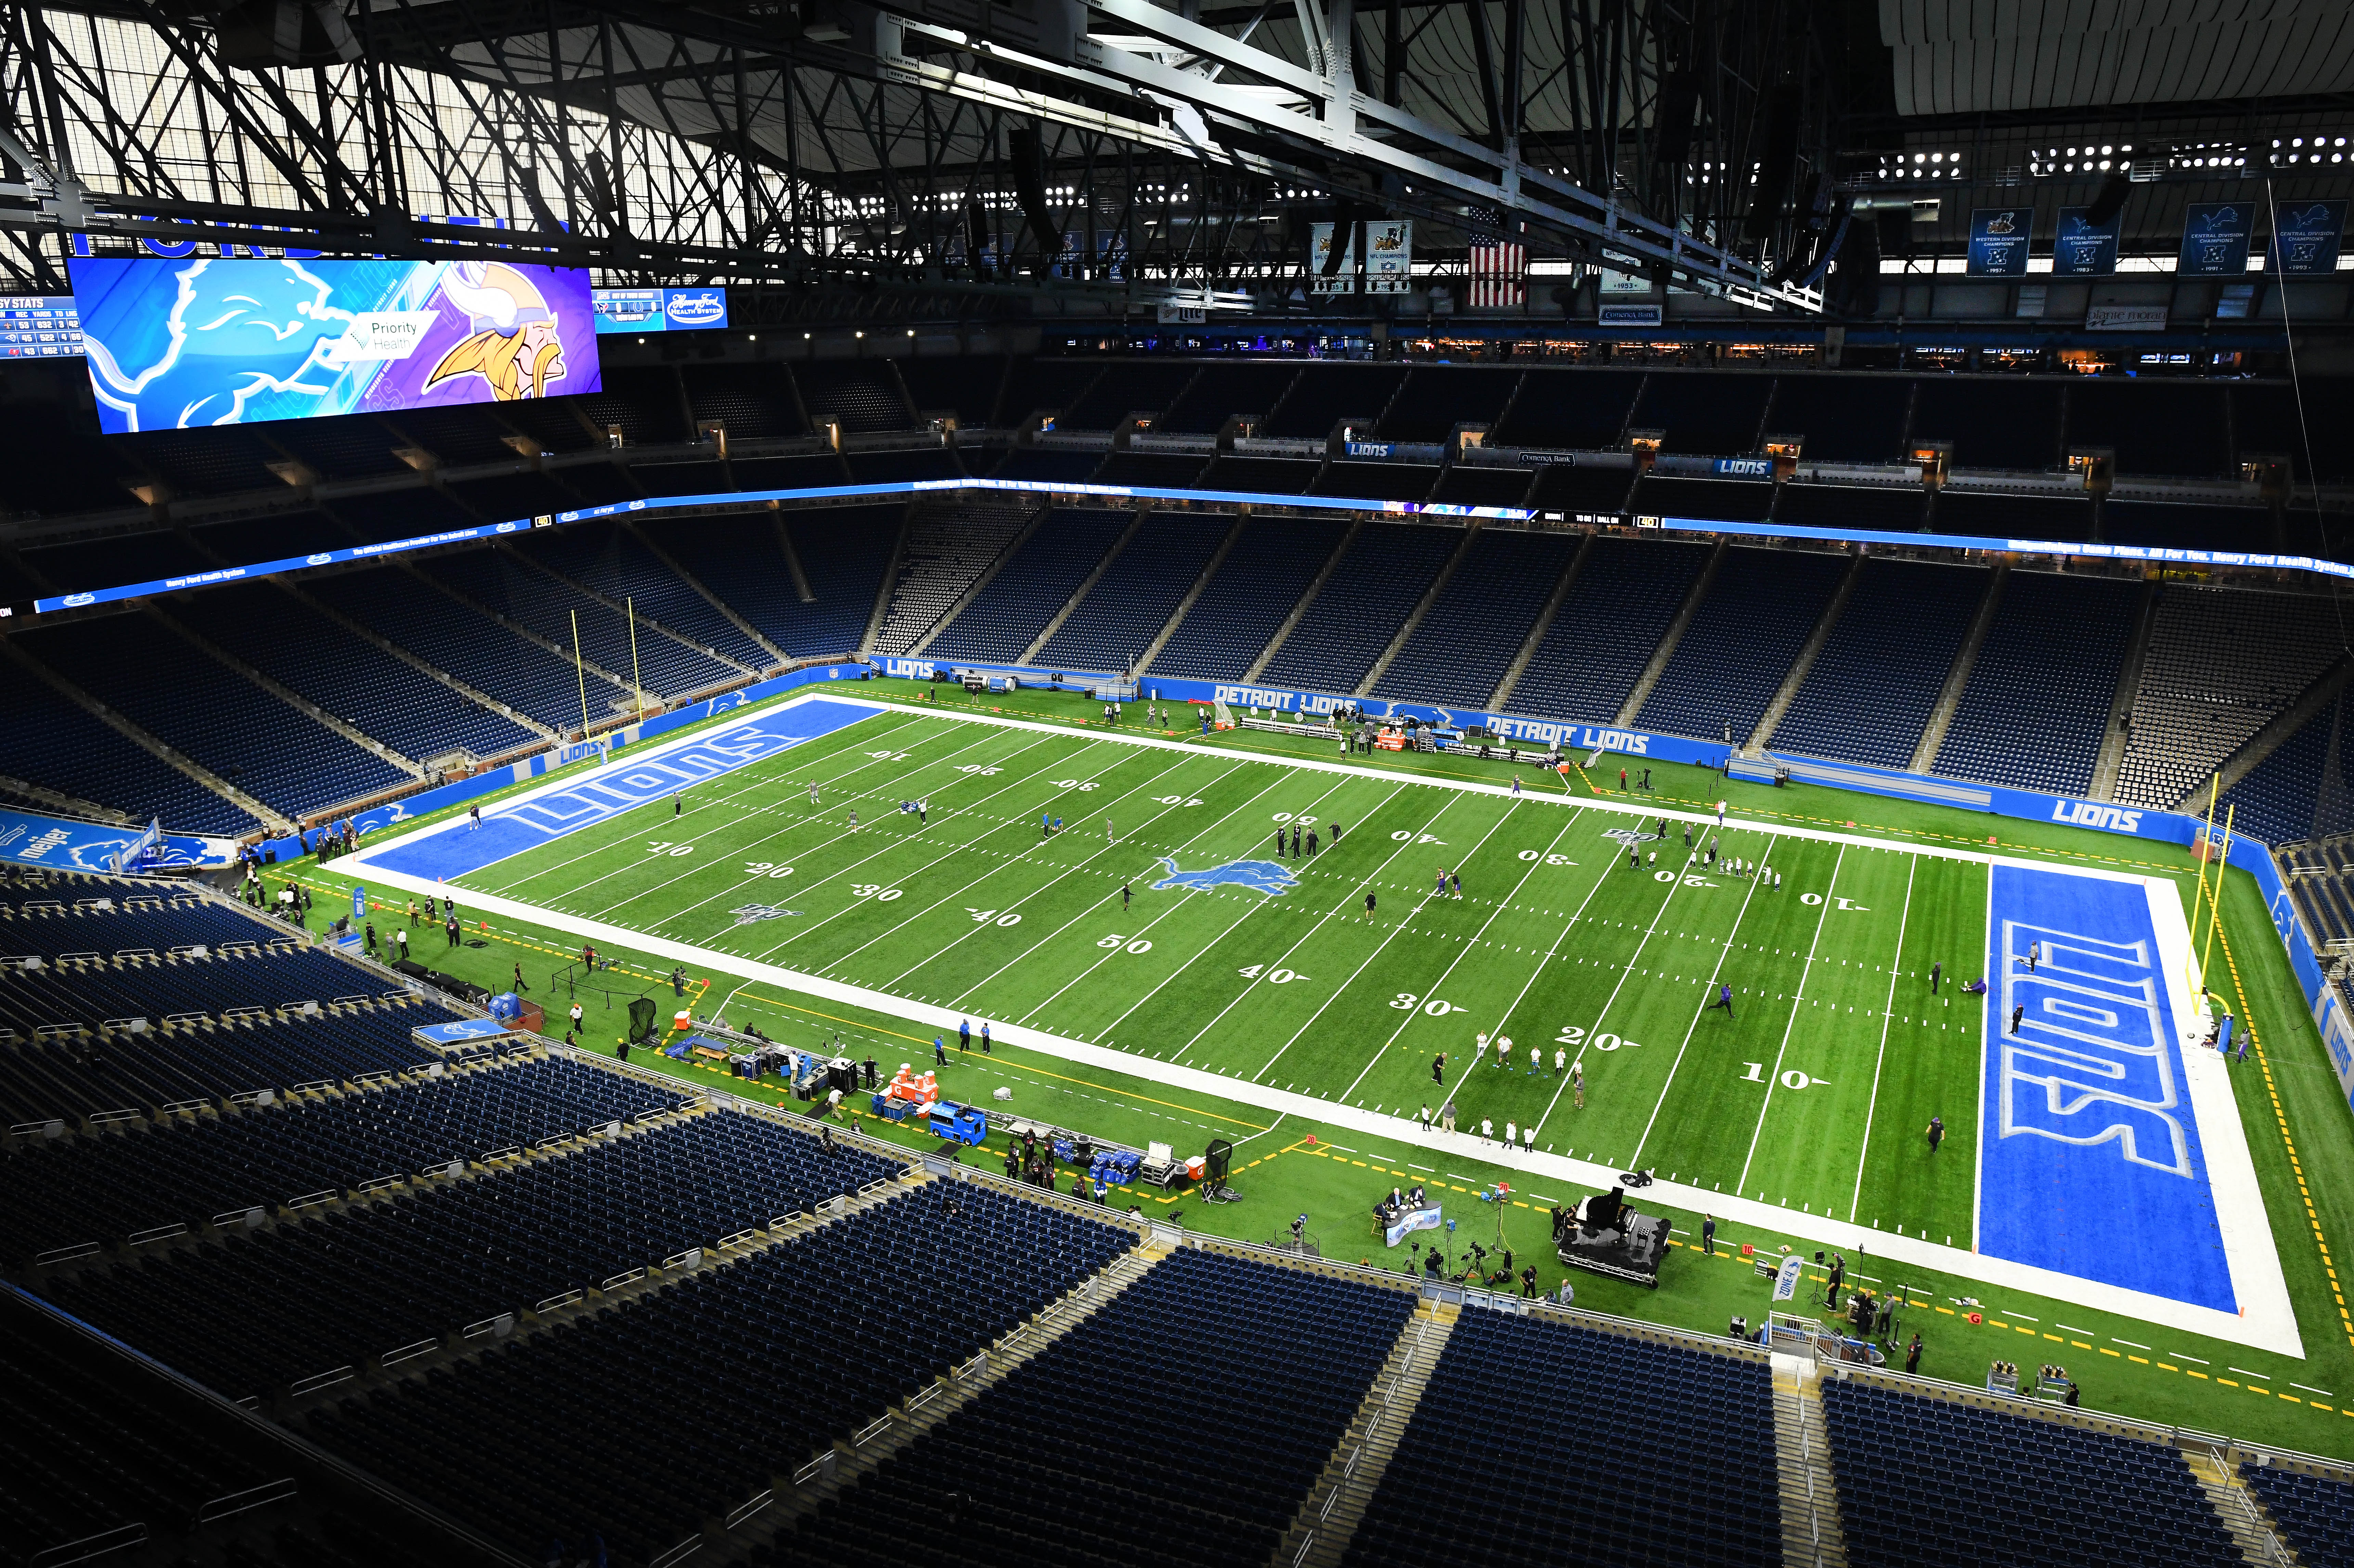 The field is quiet early Sunday morning as the Detroit Lions take on the Minnesota Vikings at Ford Field.